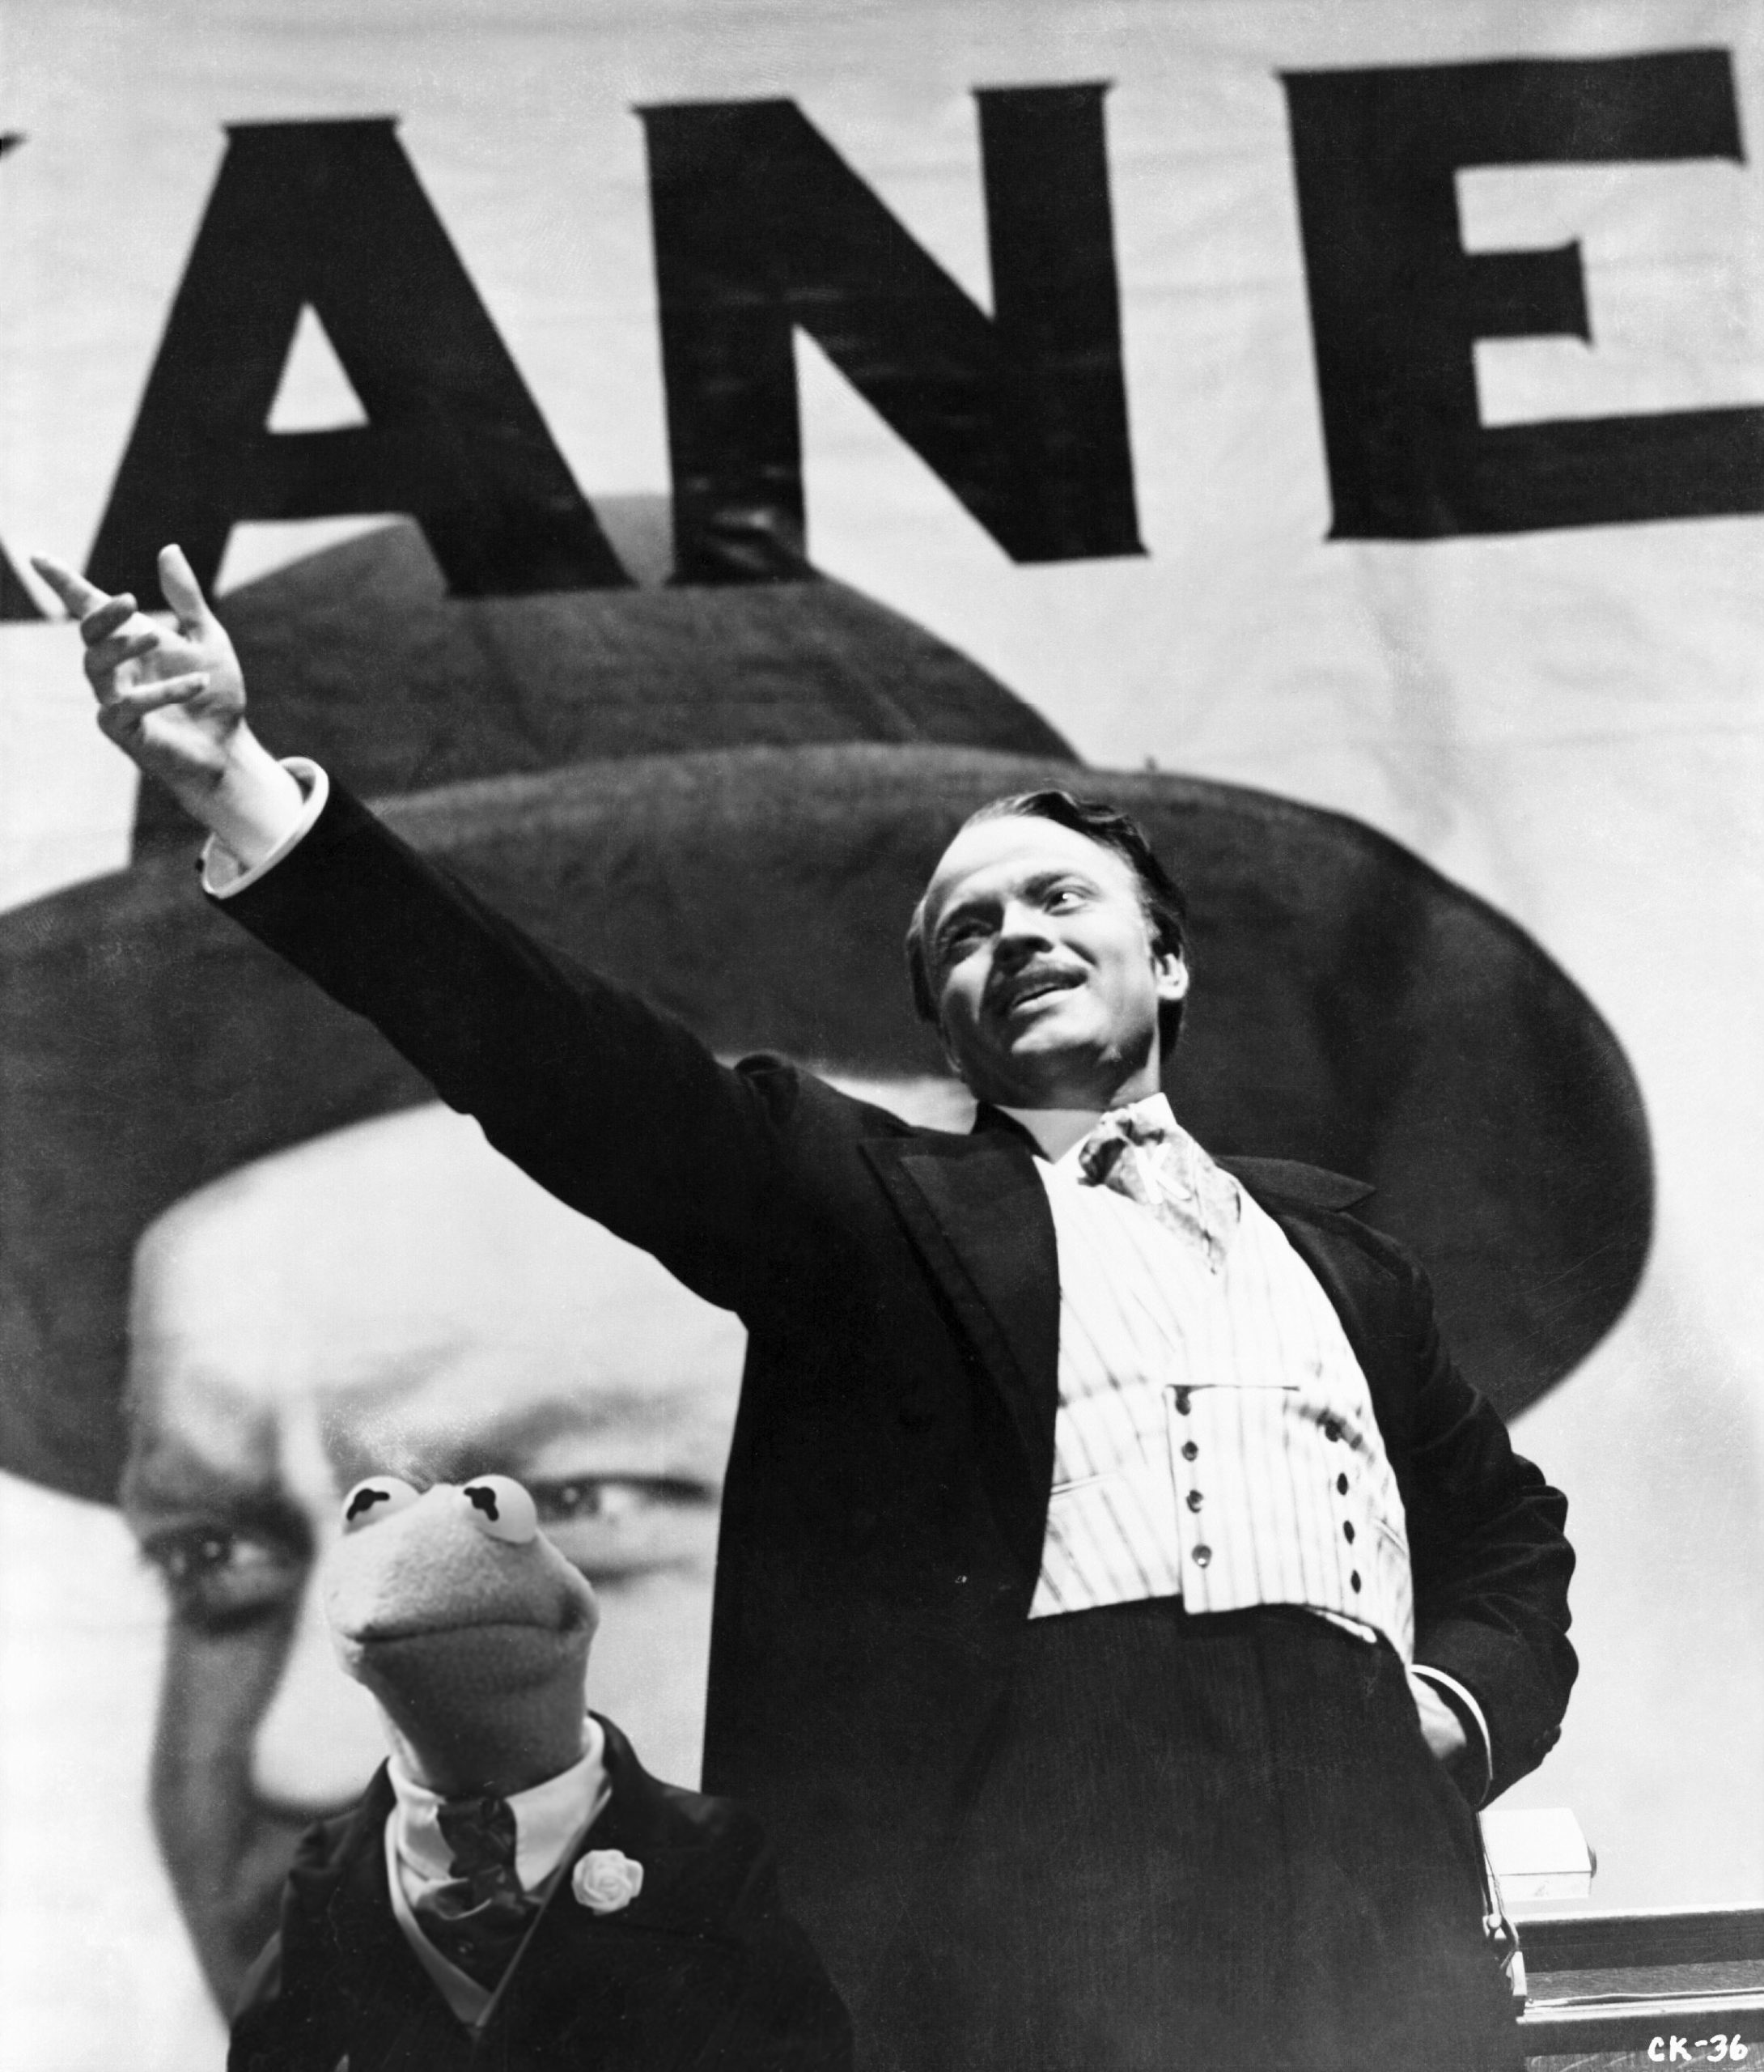 Orson Welles and Kermit in the famous campaign scene from Citizen Kane.